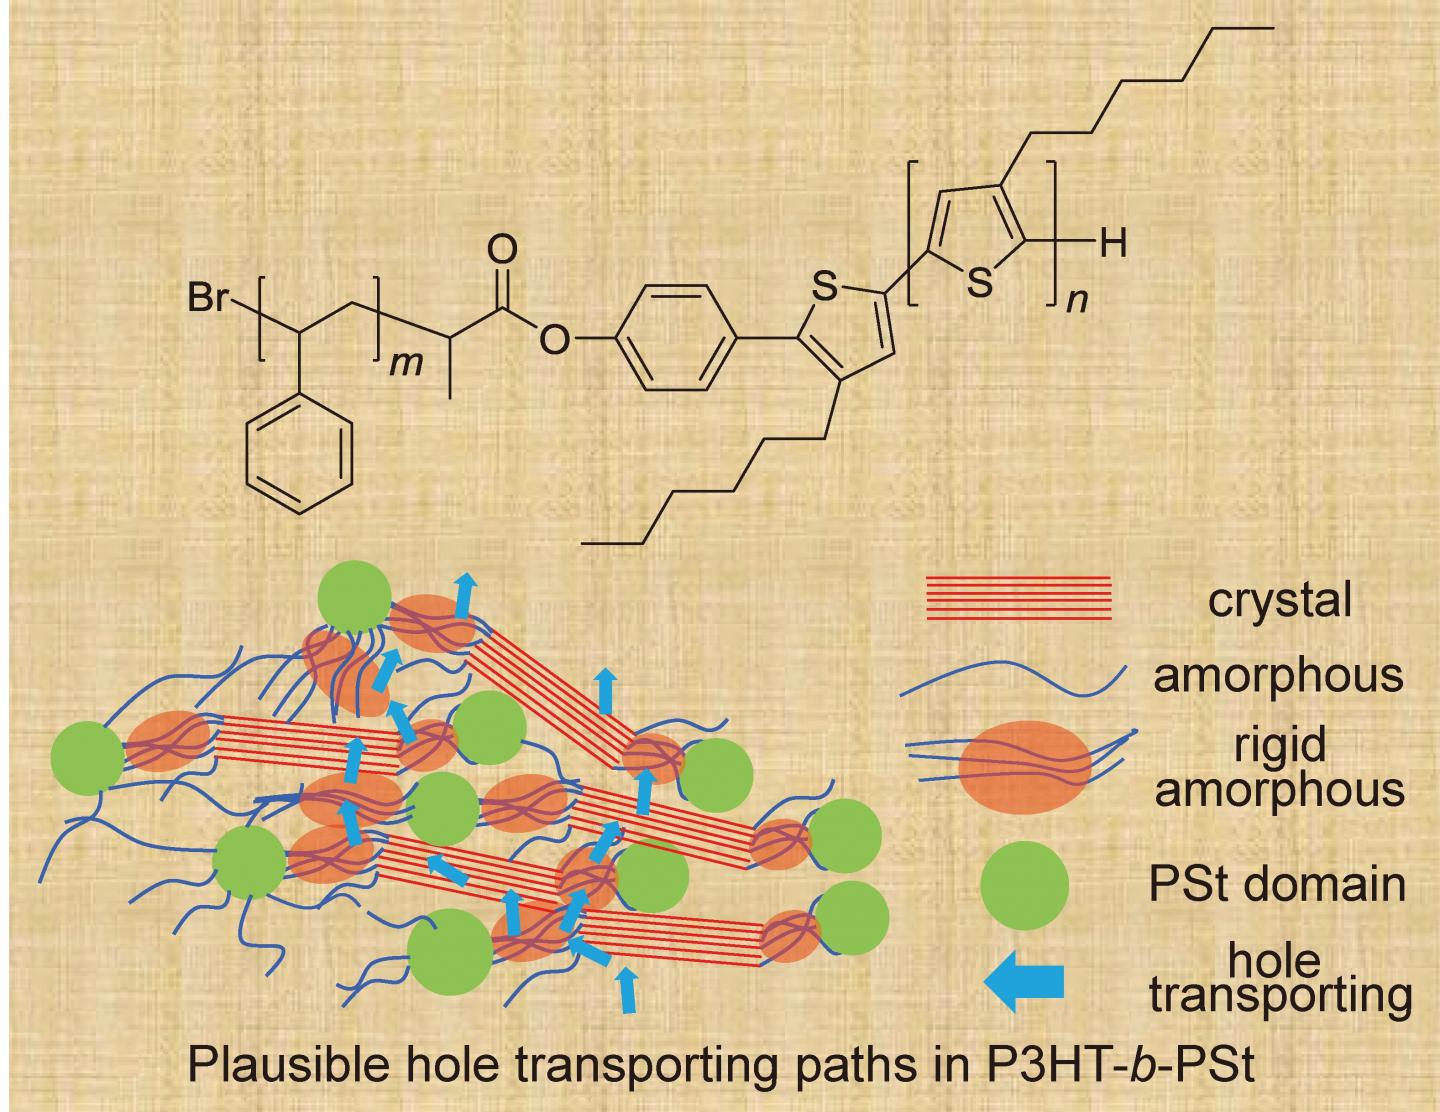 Chemical structure of poly(P3HT)-b-(PSt) and diagram of Plausible hole transporting paths in P3HT-b-PSt